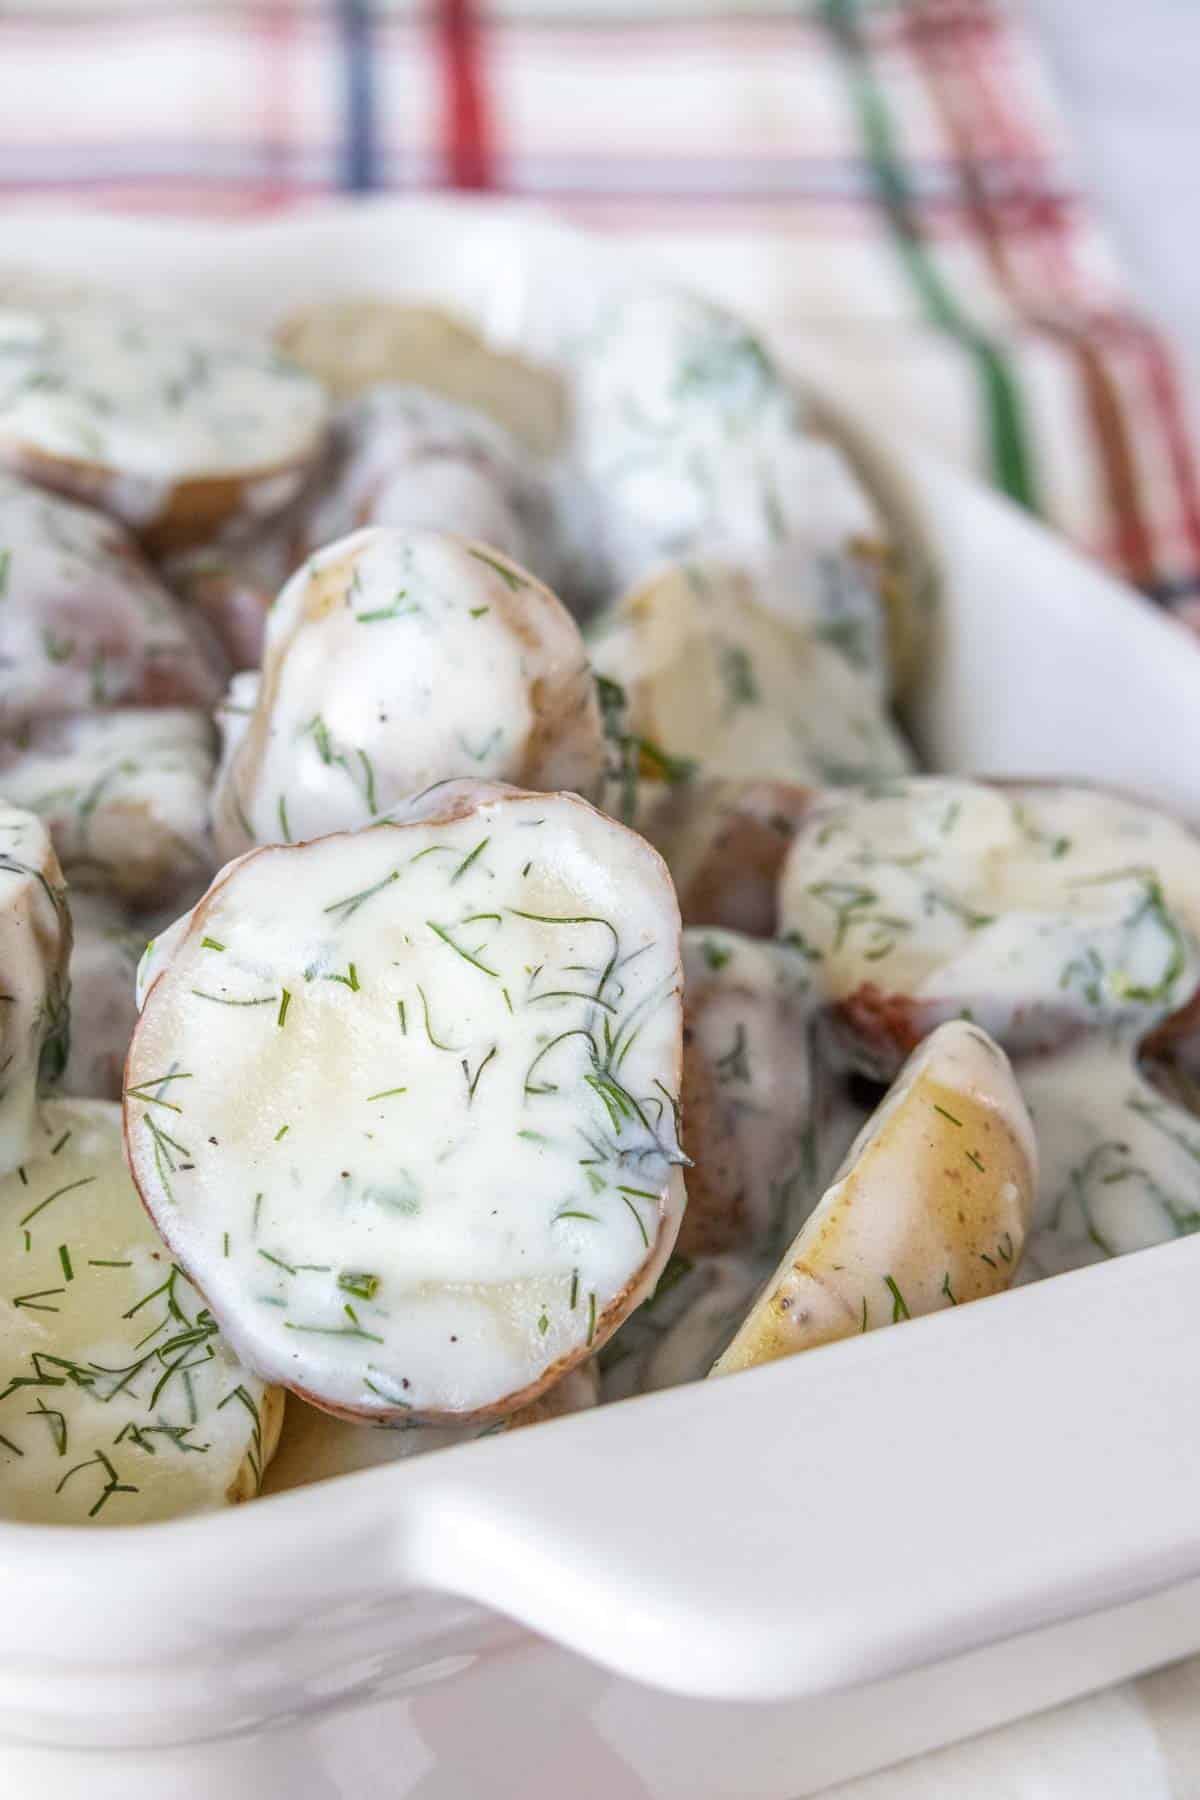 Dill potatoes in a white serving dish.